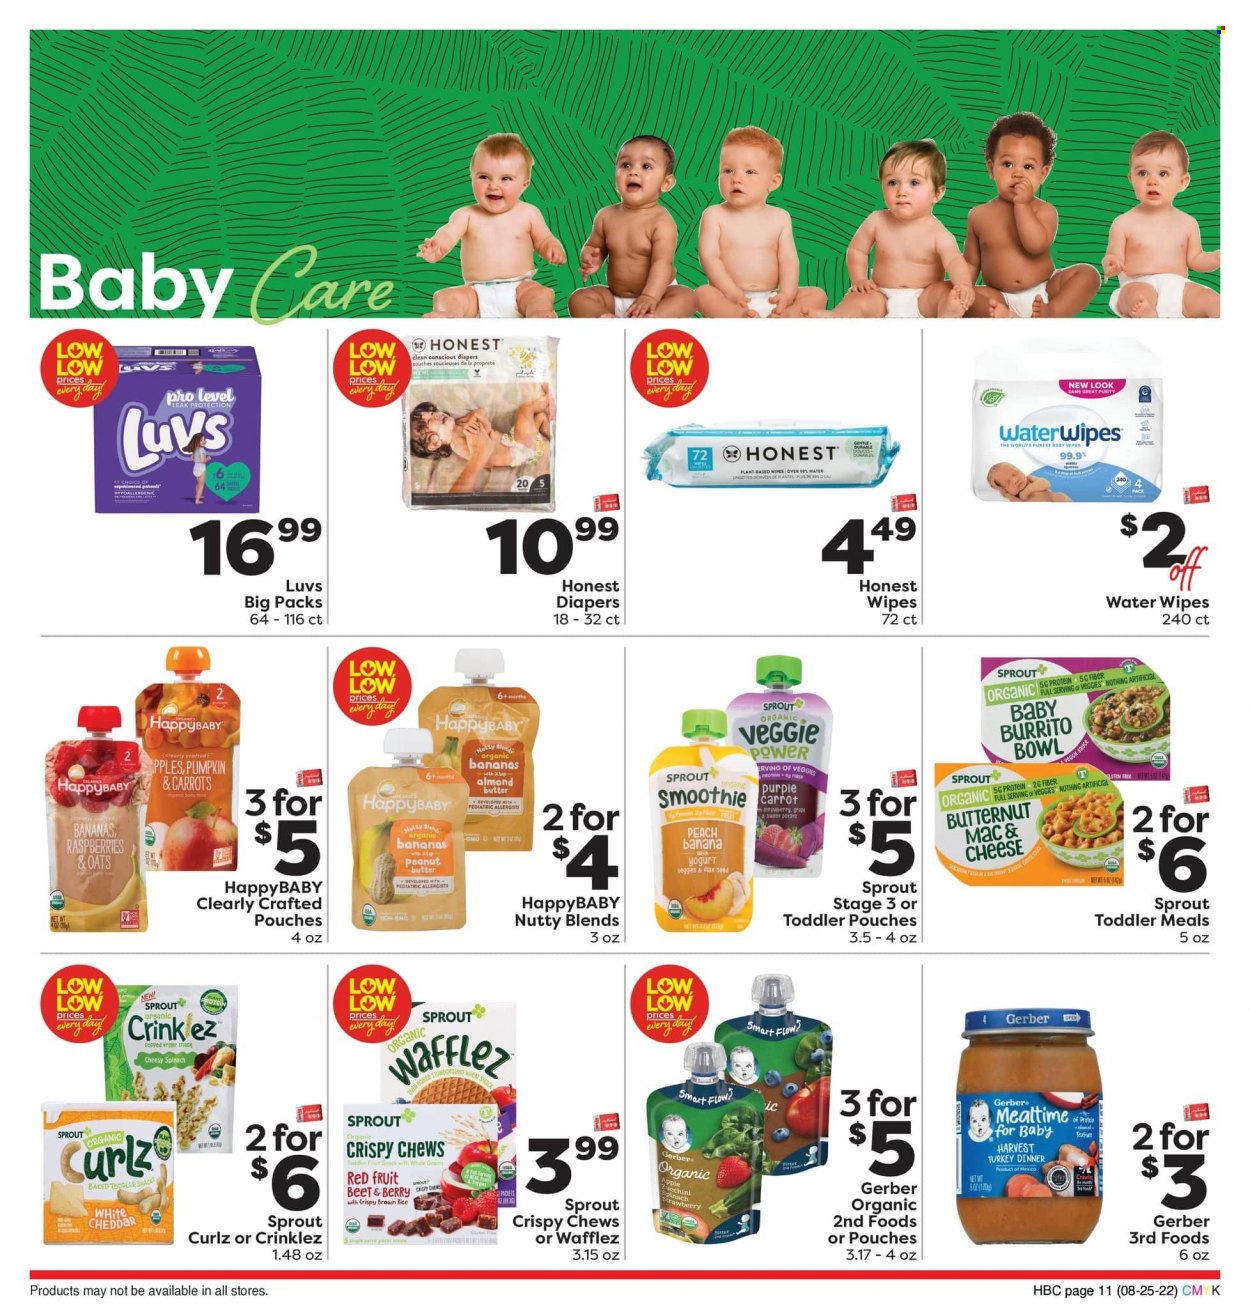 thumbnail - Weis Flyer - 08/25/2022 - 10/05/2022 - Sales products - carrots, zucchini, organic bananas, sauce, burrito, cheddar, yoghurt, almond butter, snack, crispy chews, Gerber, brown rice, peanut butter, smoothie, baby food pouch, Purity, wipes, baby wipes, nappies, straw, bowl, plant seeds, butternut squash. Page 11.